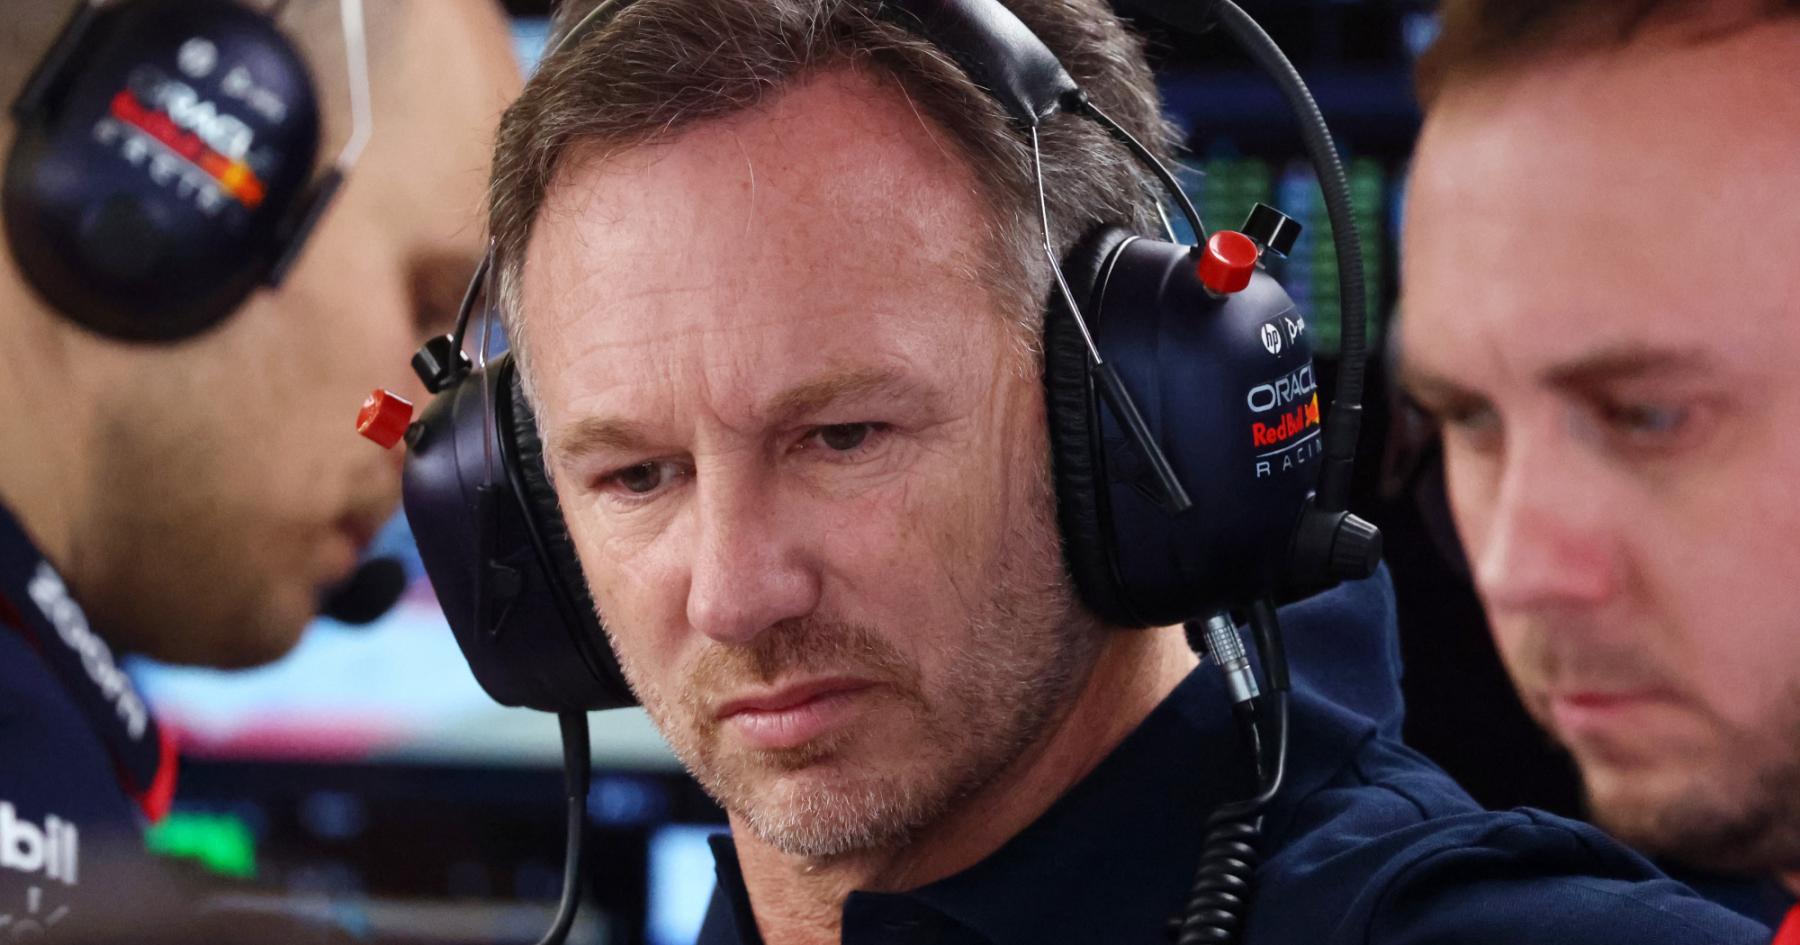 Revving Up for Success: Horner and Red Bull's Next Frontiers